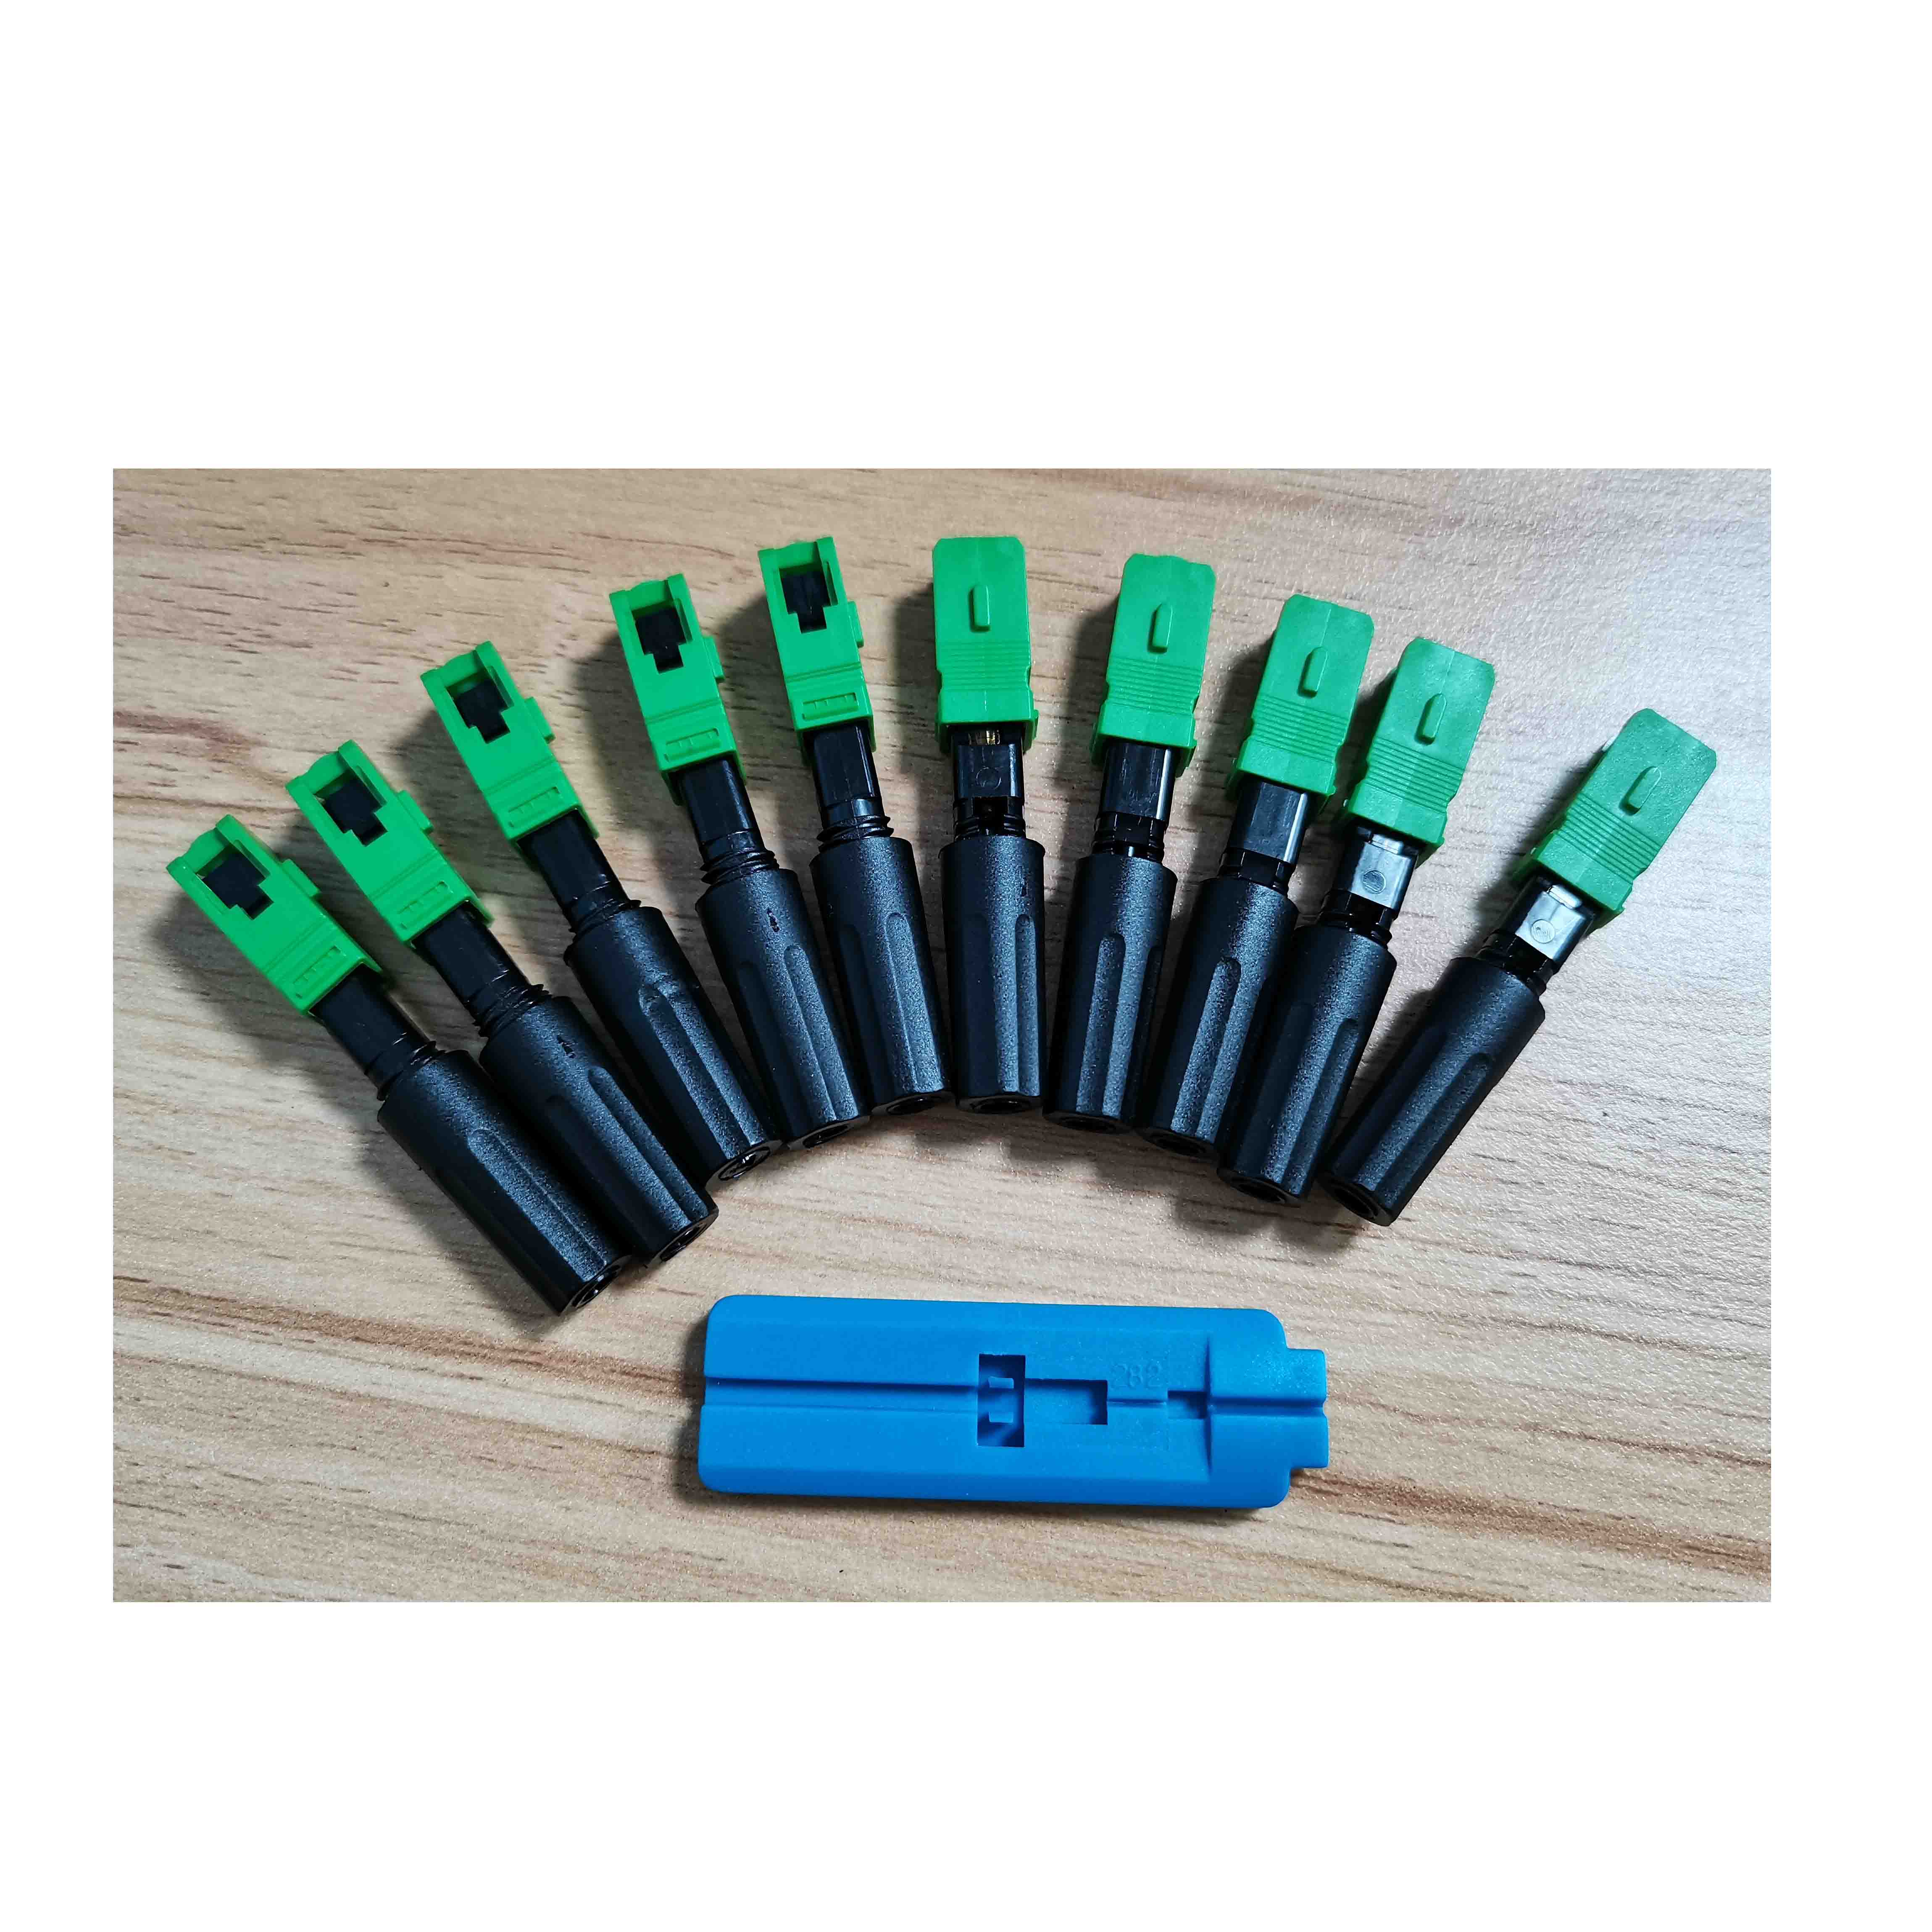 50MM Fiber embedded fast SC connector apc pc for drop cable 2*3mm 2mm or 3mm average 0.3dB